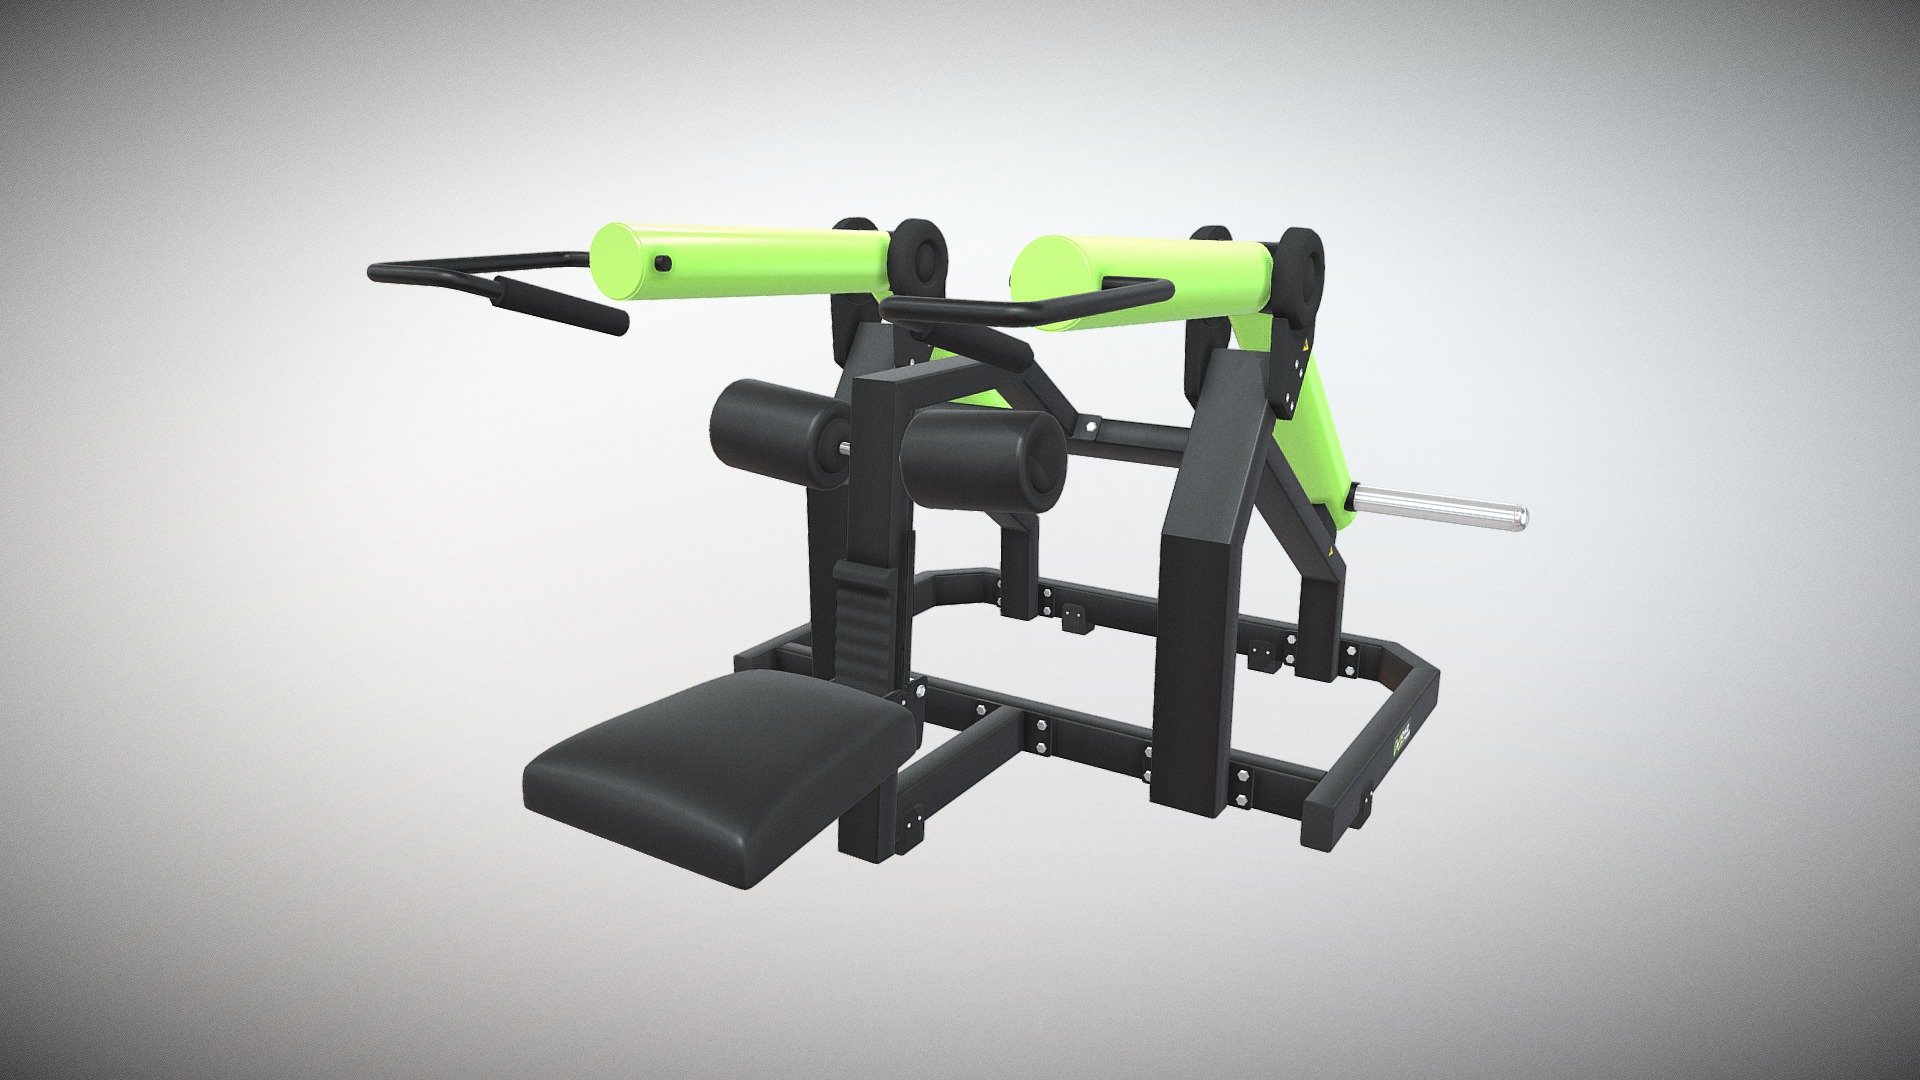 Effective exercise position for full activation of triceps and pectoral muscles. Each arm can be moved individually, which ensures a balanced muscle structure and also allows for a separate training. Thigh rollers for a stable seating position.
http://dhz-fitness.de/en/plate-loaded#Y960 - SEATED DIP Y960 - 3D model by supersport-fitness 3d model